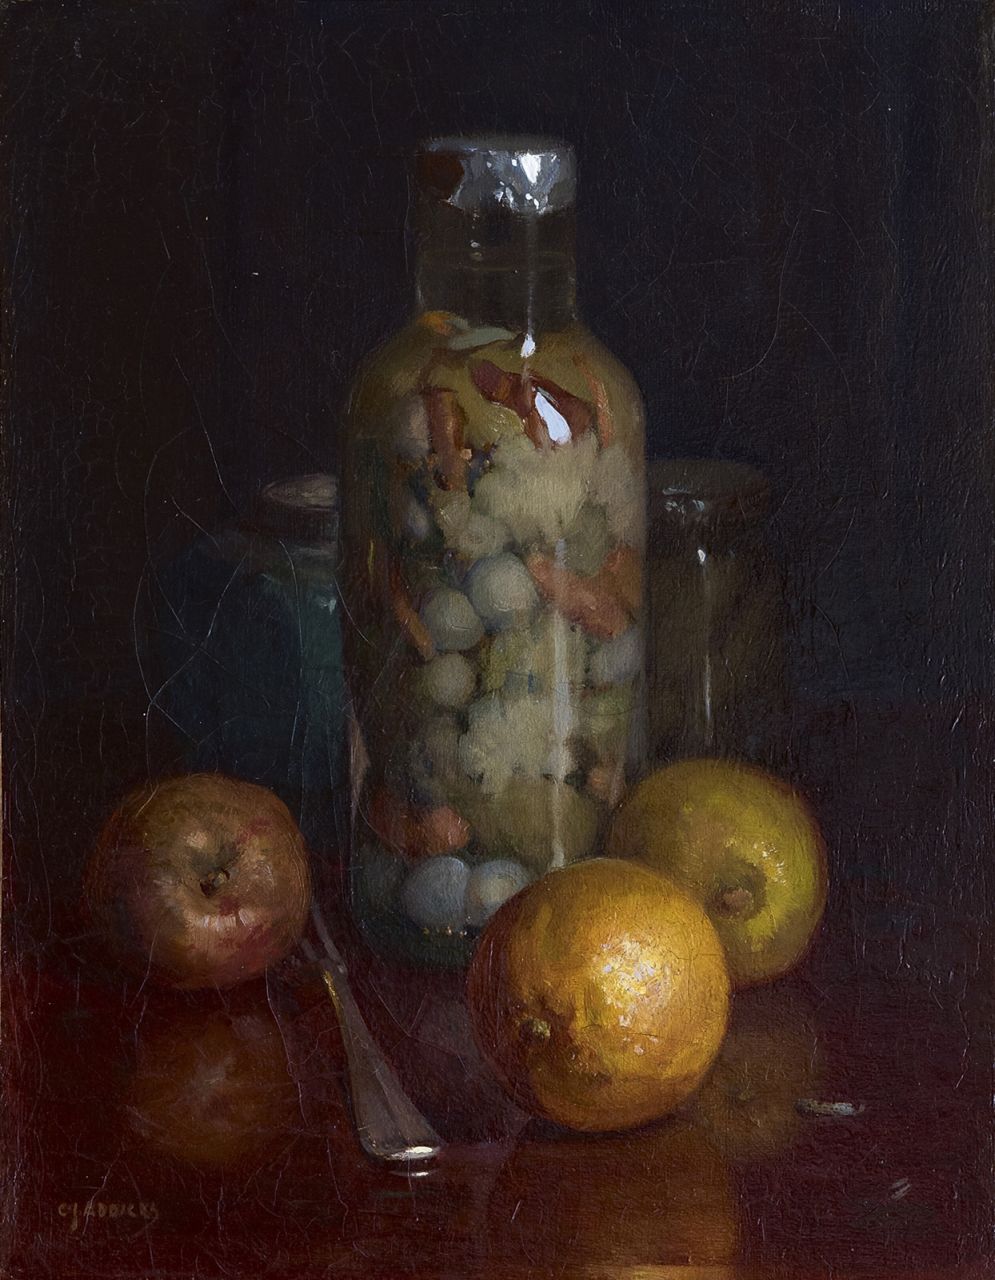 Christiaan Addicks | A still life with a glass preserving jar and fruit, oil on canvas, 35.8 x 27.8 cm, signed l.l.